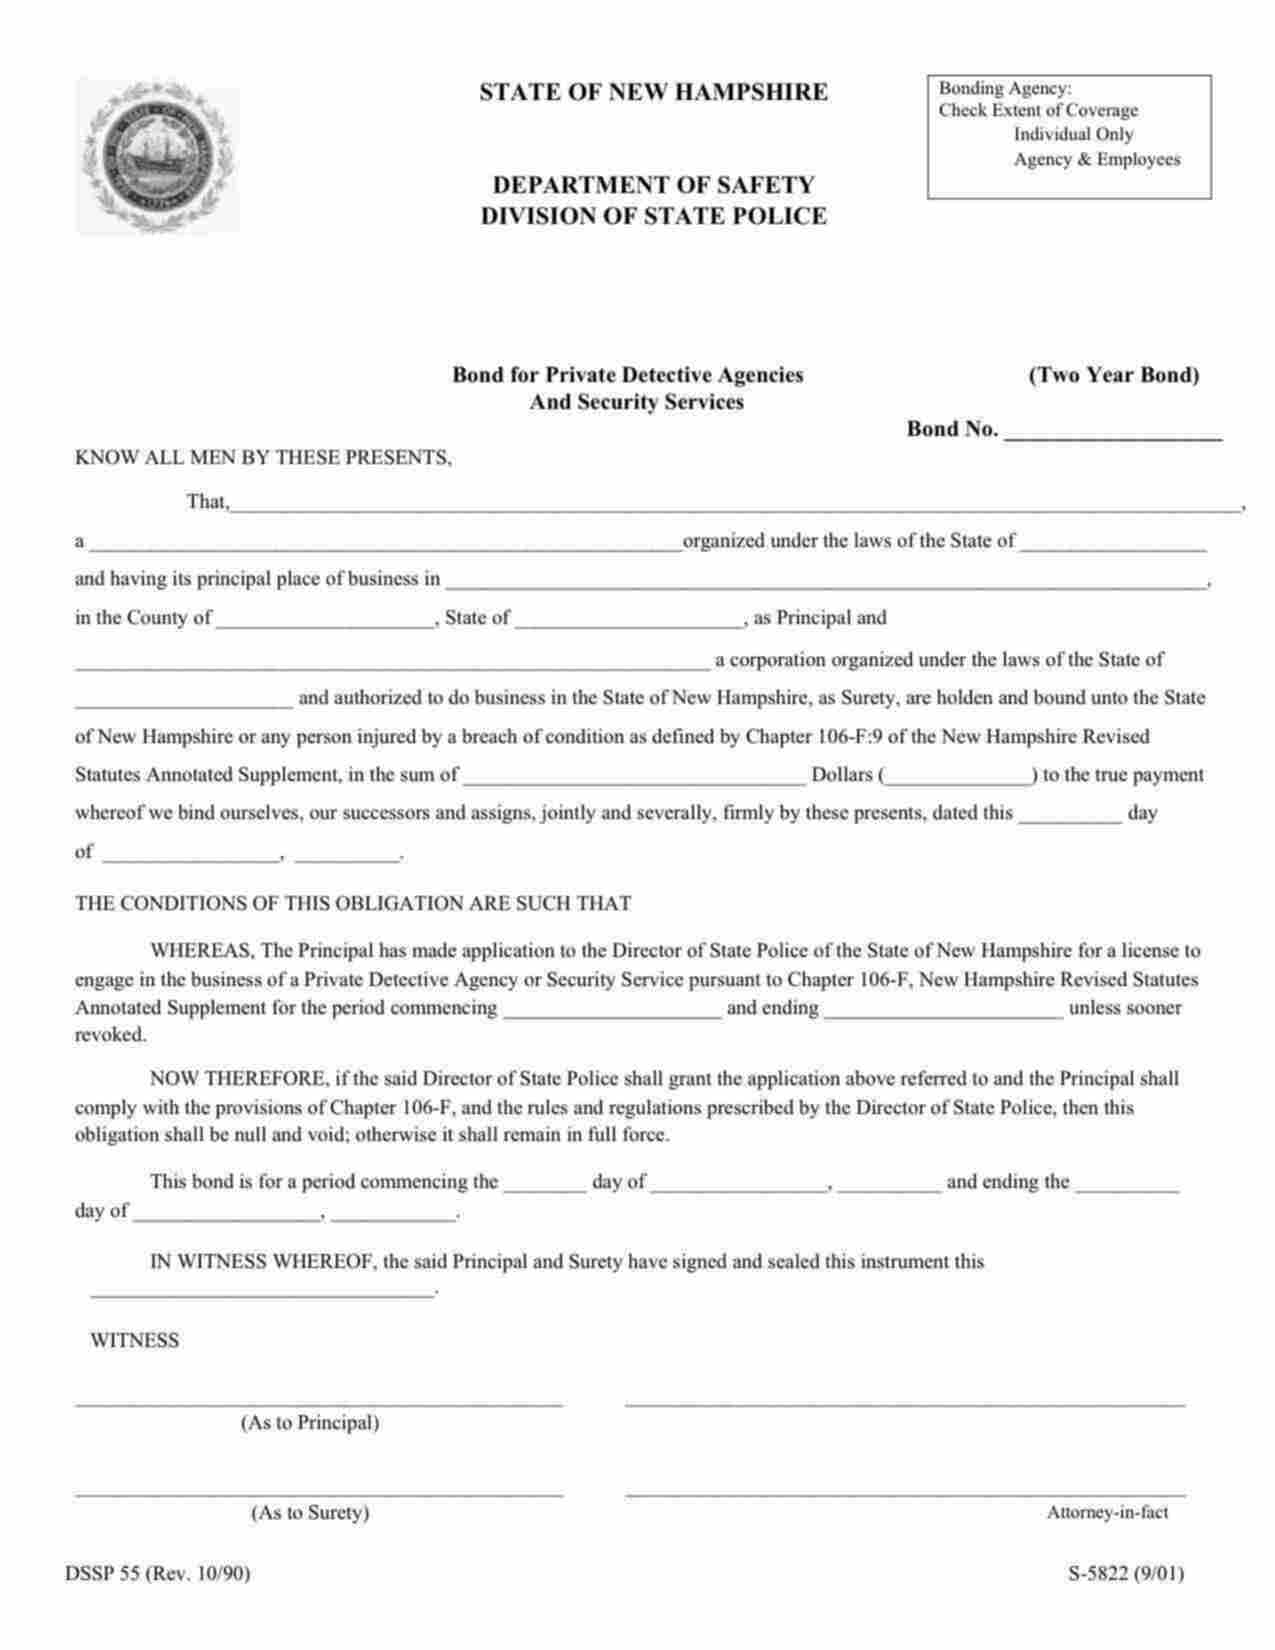 New Hampshire Private Detective Agencies and Security Services (Individual Only) Bond Form